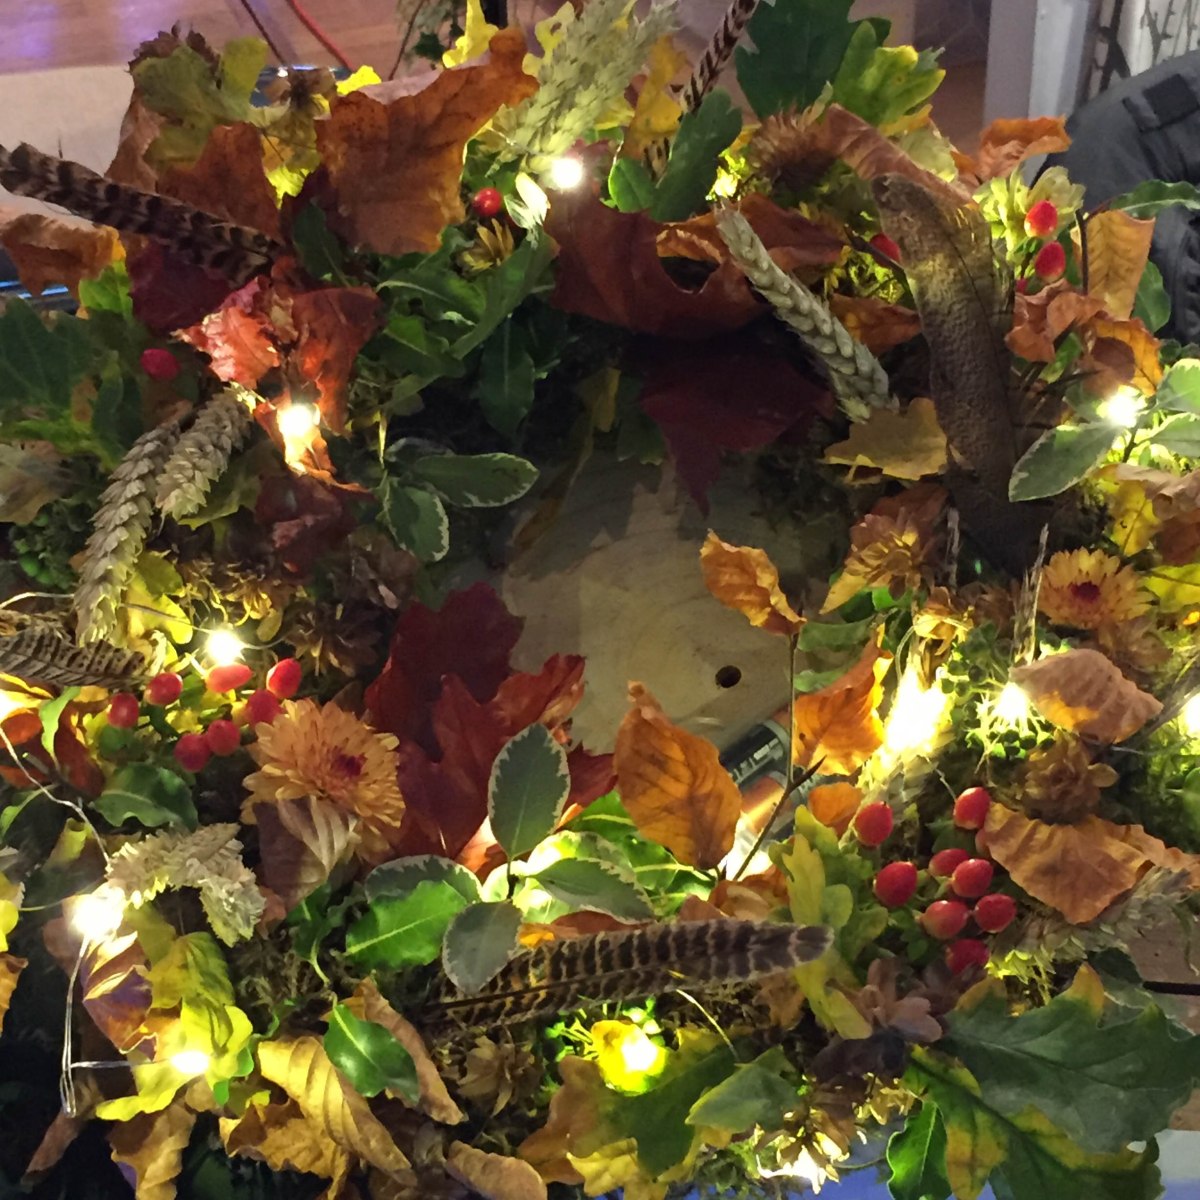 A photograph of a traditional-looking wreath with autumnal leaves, a few white fairy lights and even some game bird feathers